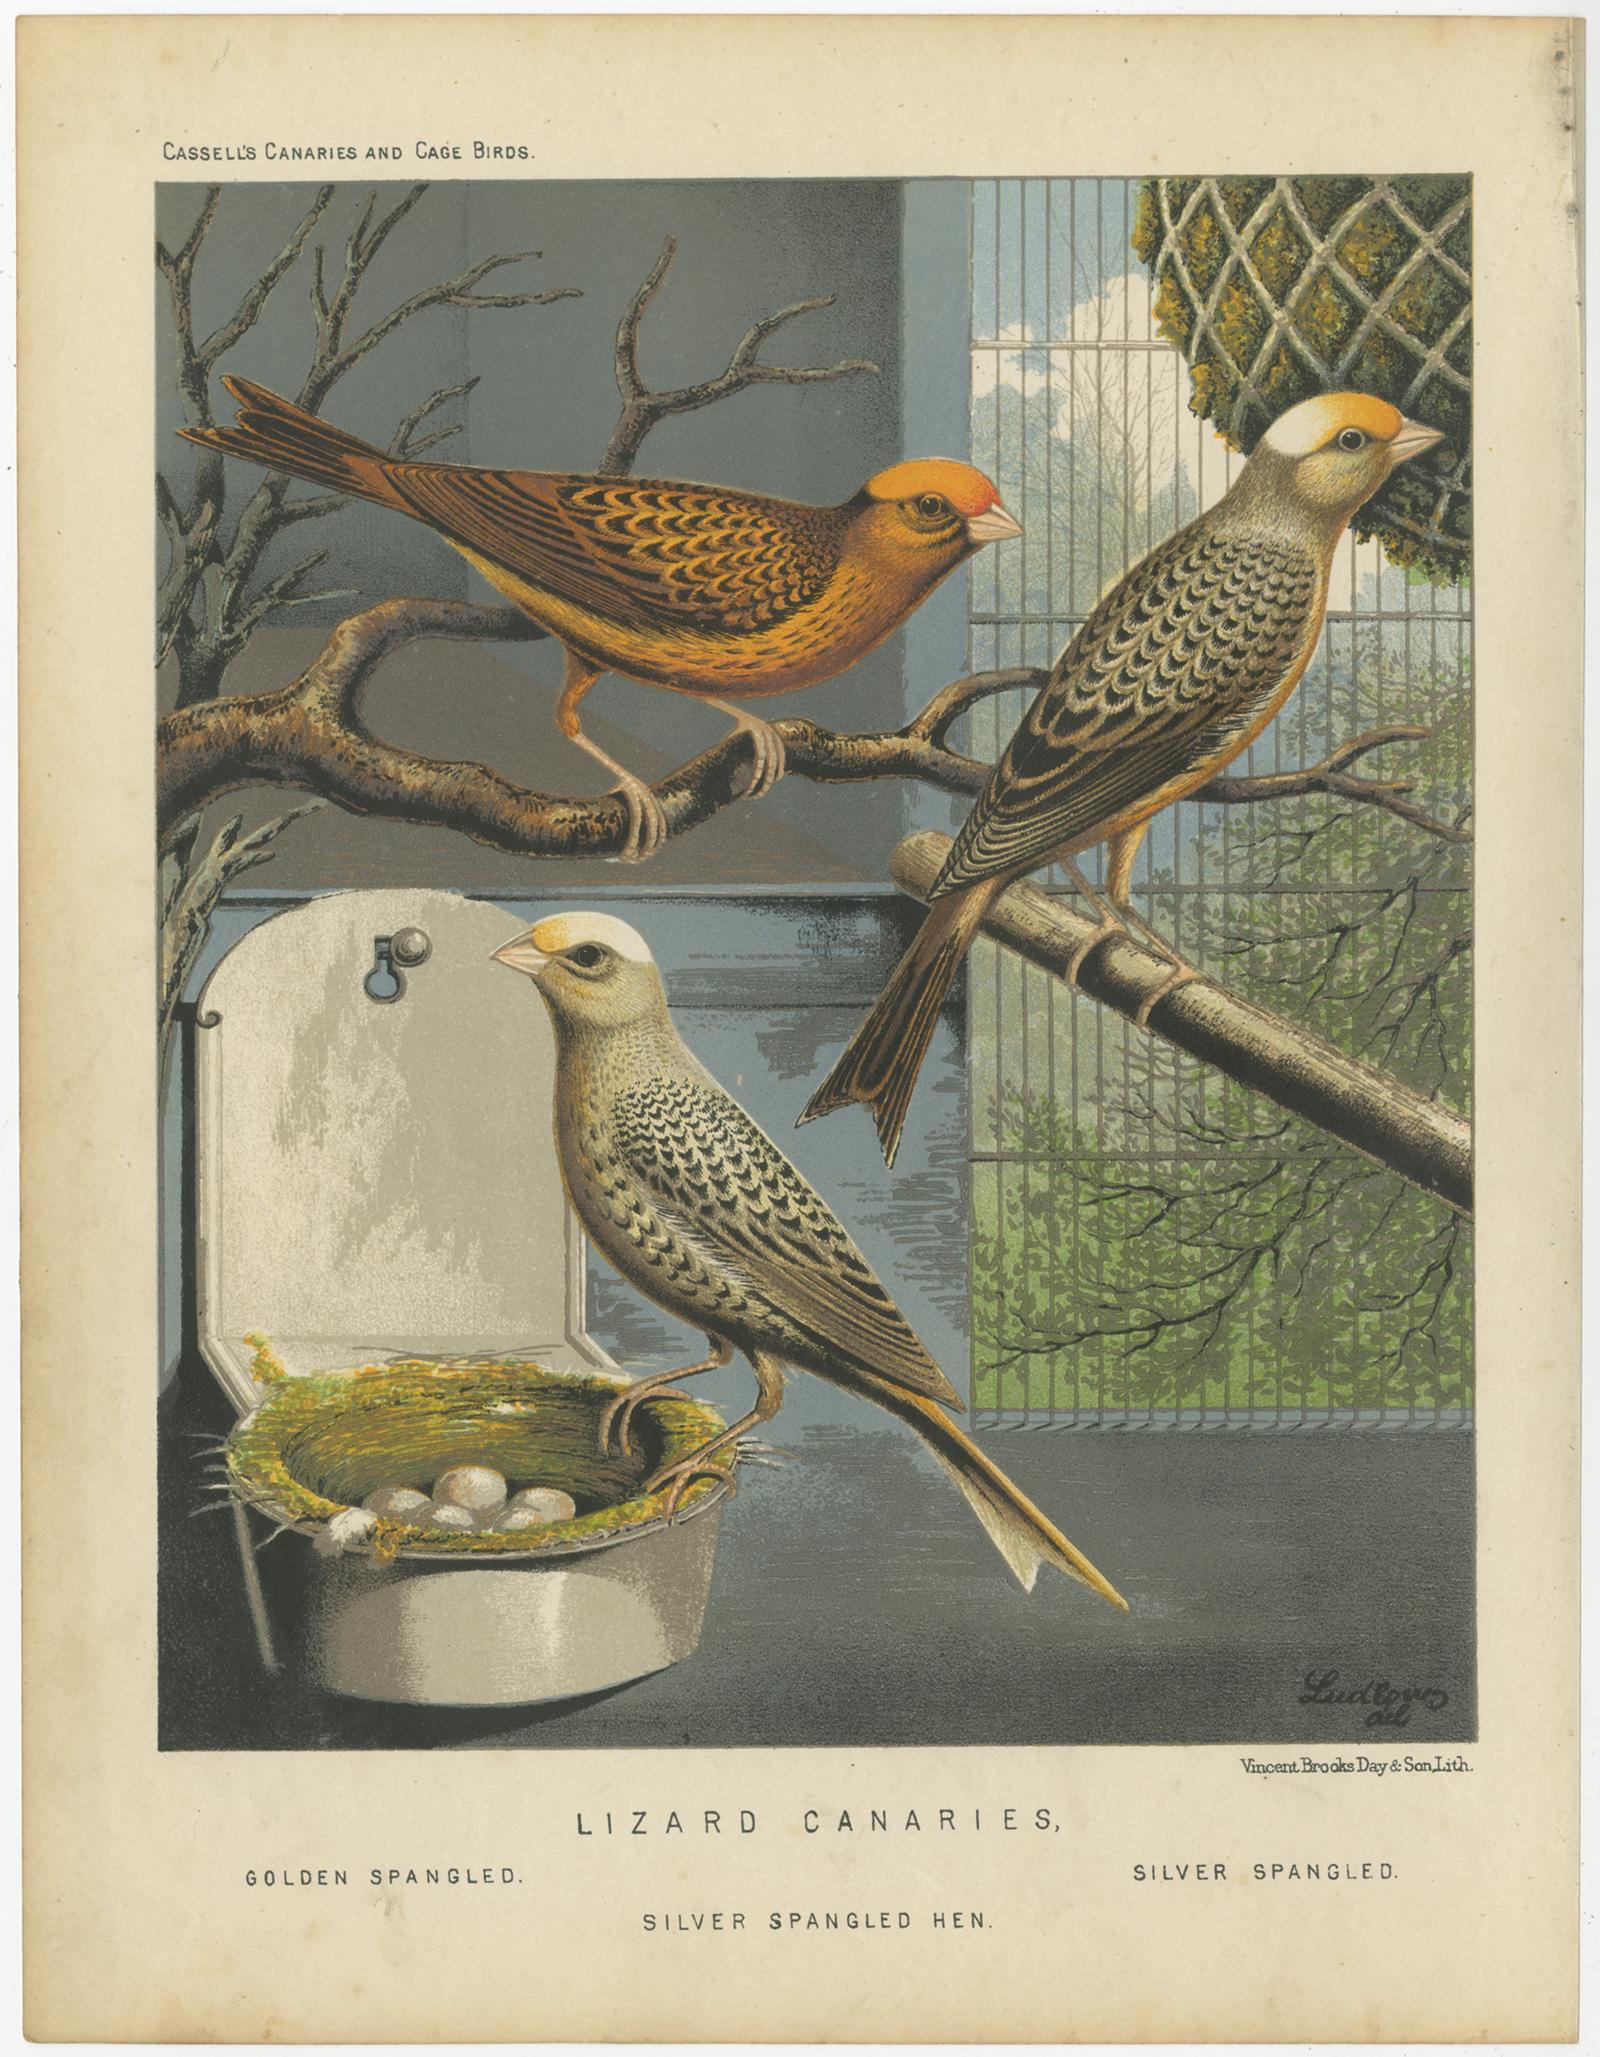 Antique bird print titled 'Lizard Canaries 1. Golden Spangled 2. Silver Spangled 3. Silver Spangled' Old bird print depicting the Lizard Canaries: Golden Spangled, Silver Spangled, Silver Spangled. This print originates from: 'Illustrated book of